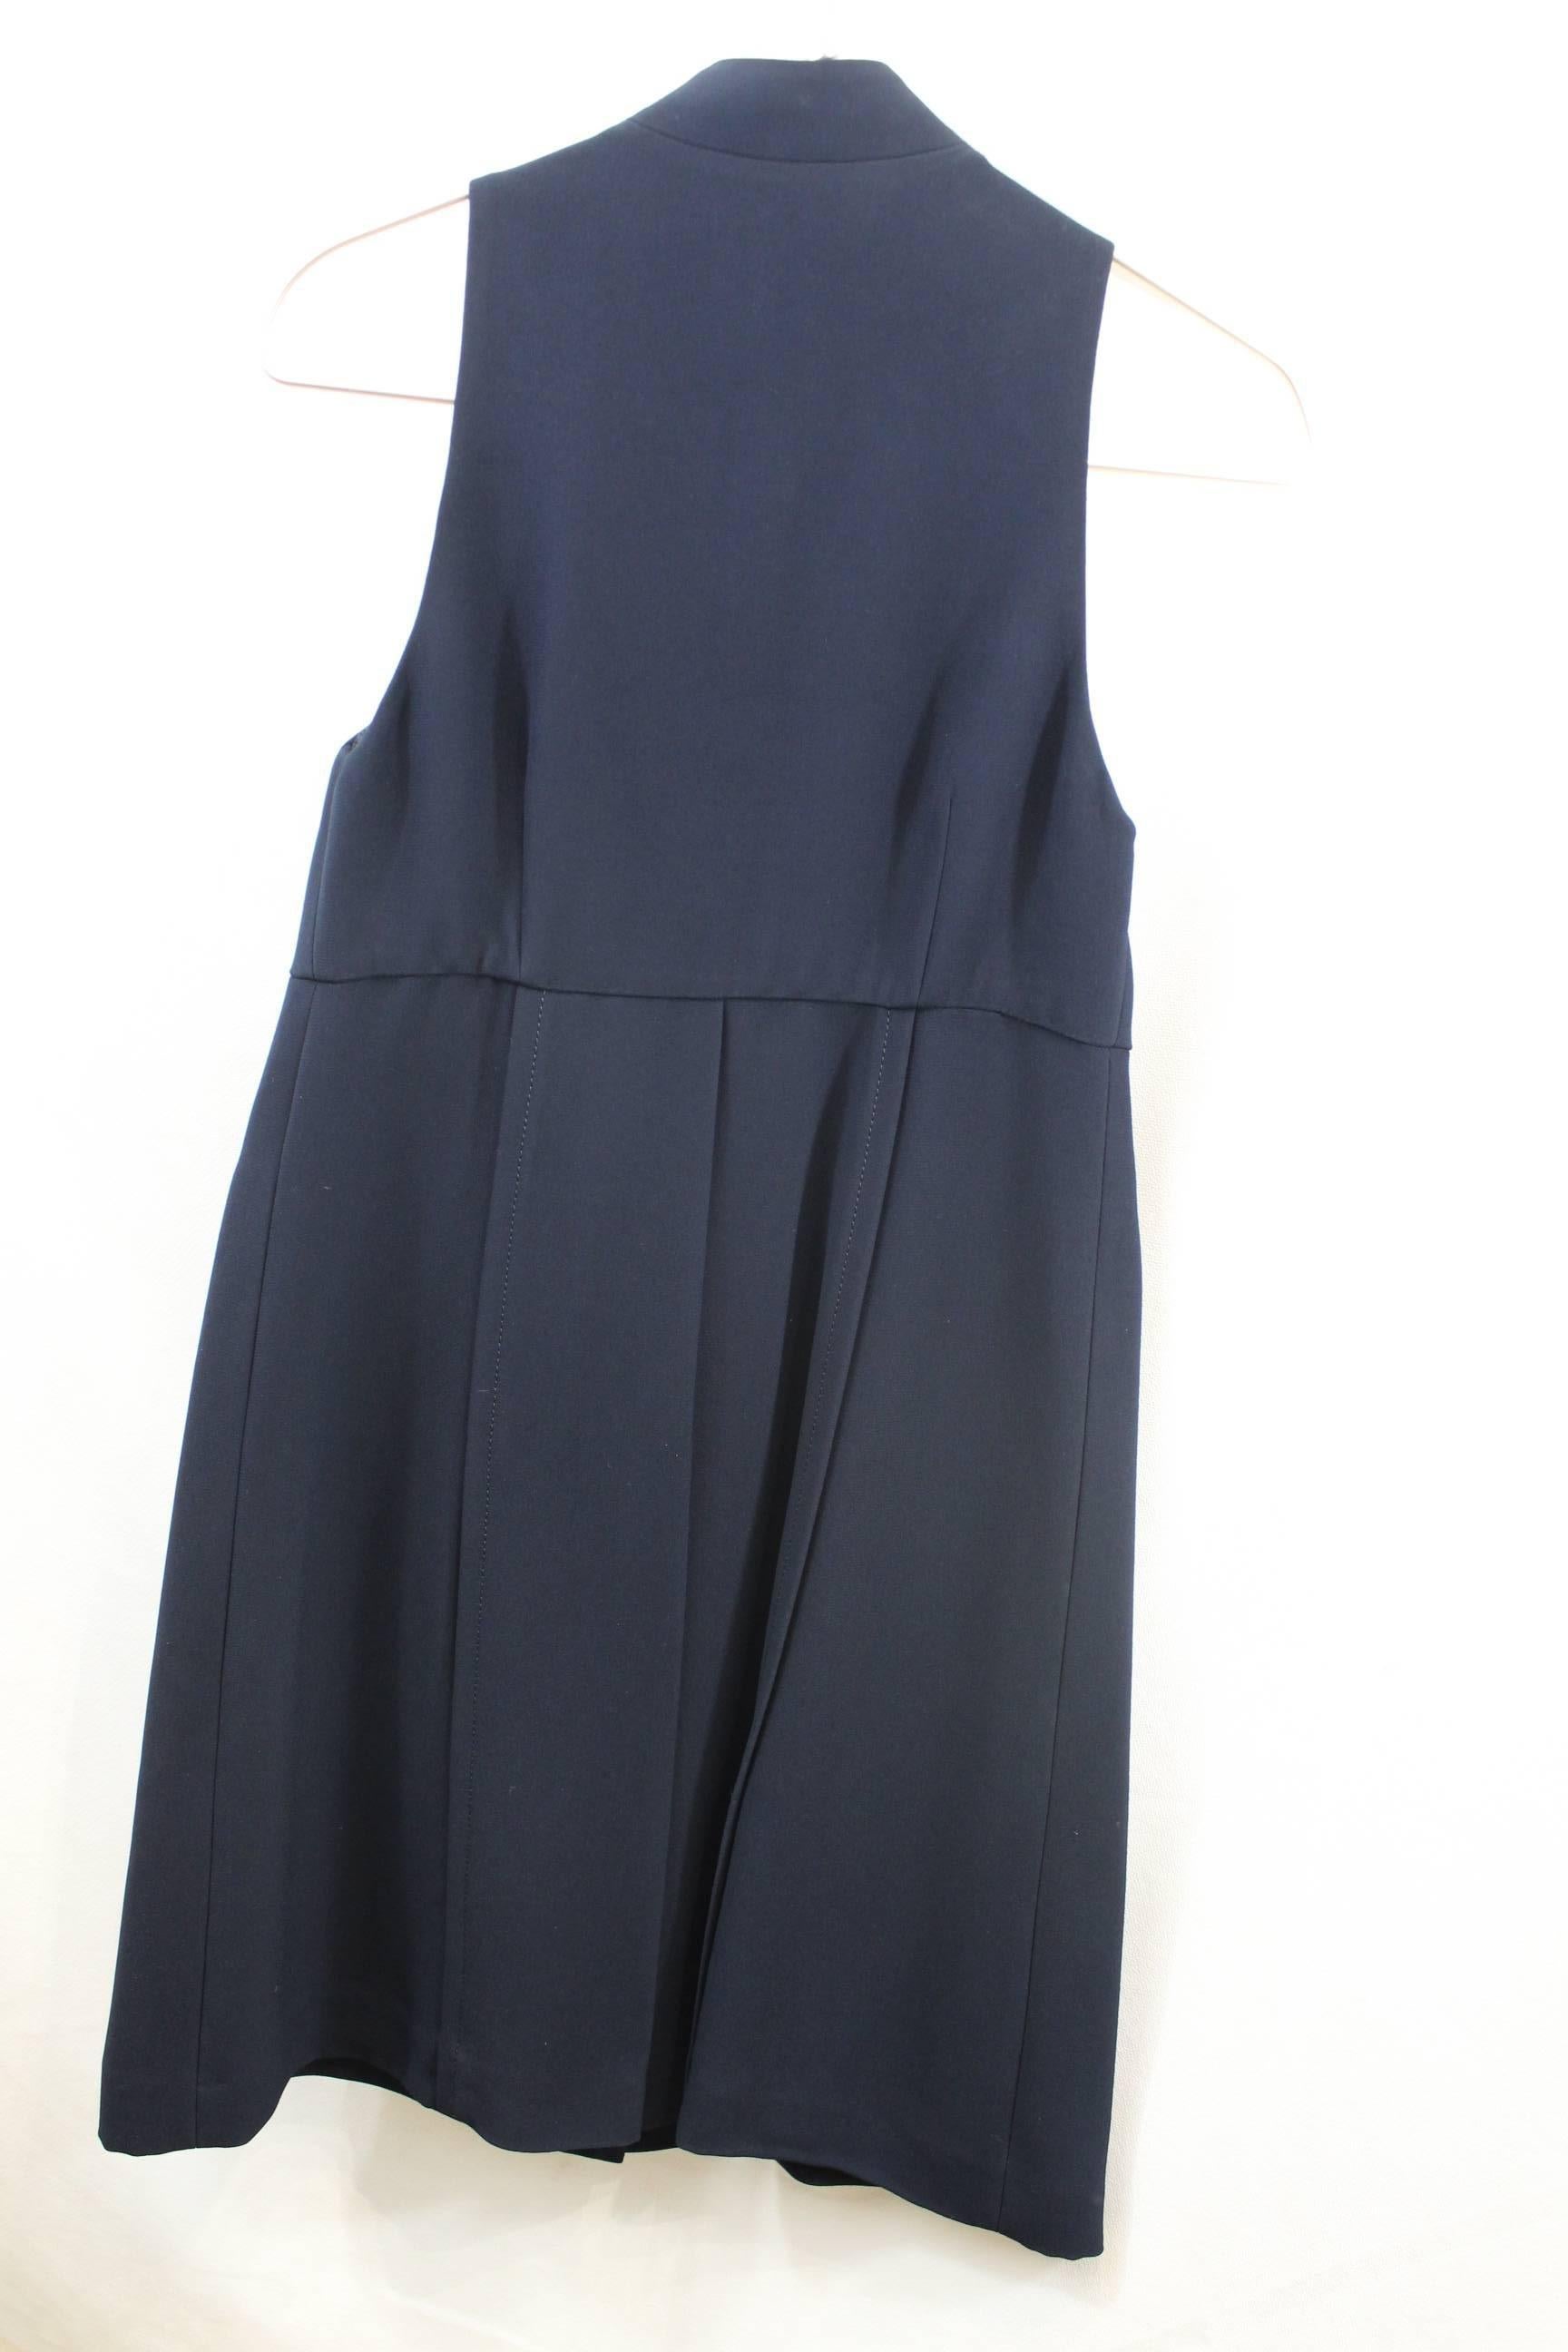 Awesome Miu miu Navy dress from 2015 collection.
Worn once.
Size 36
